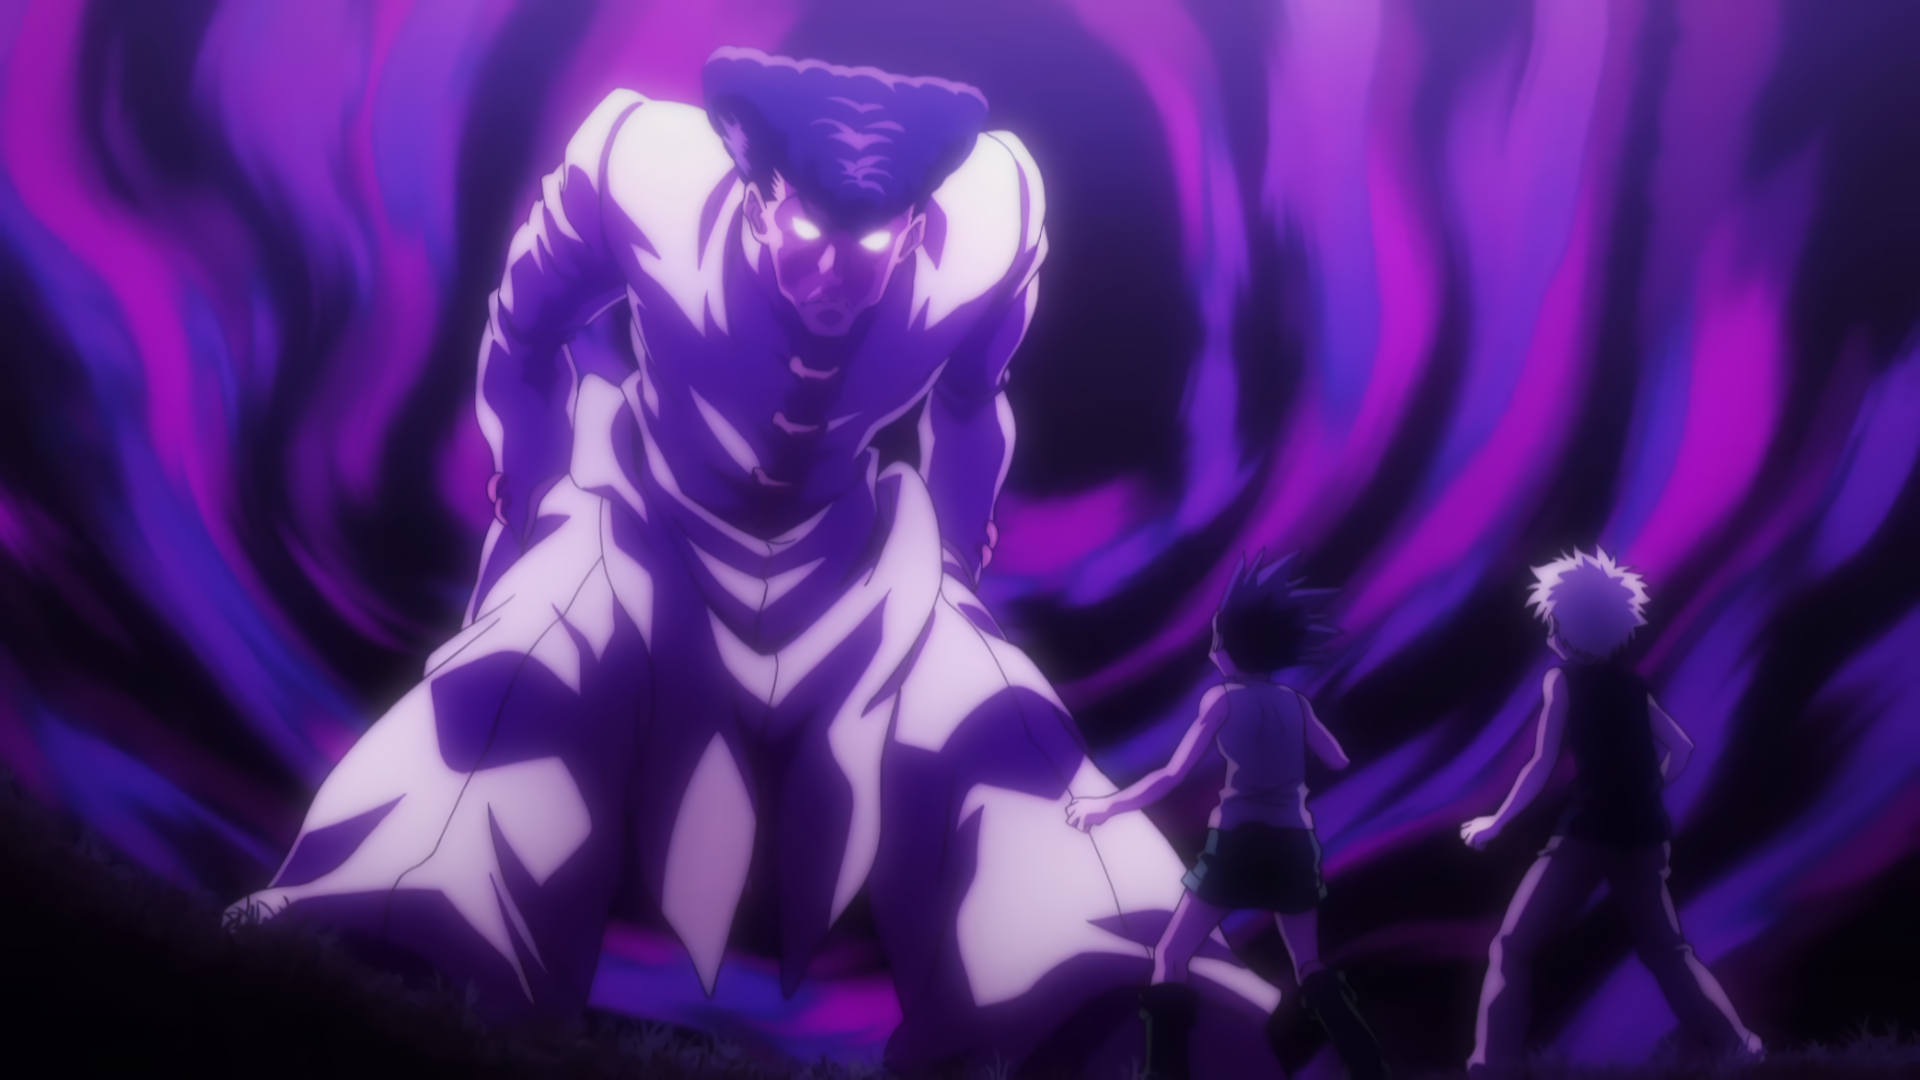 Hunter x Hunter (2011) Episode 134 Discussion - Forums 